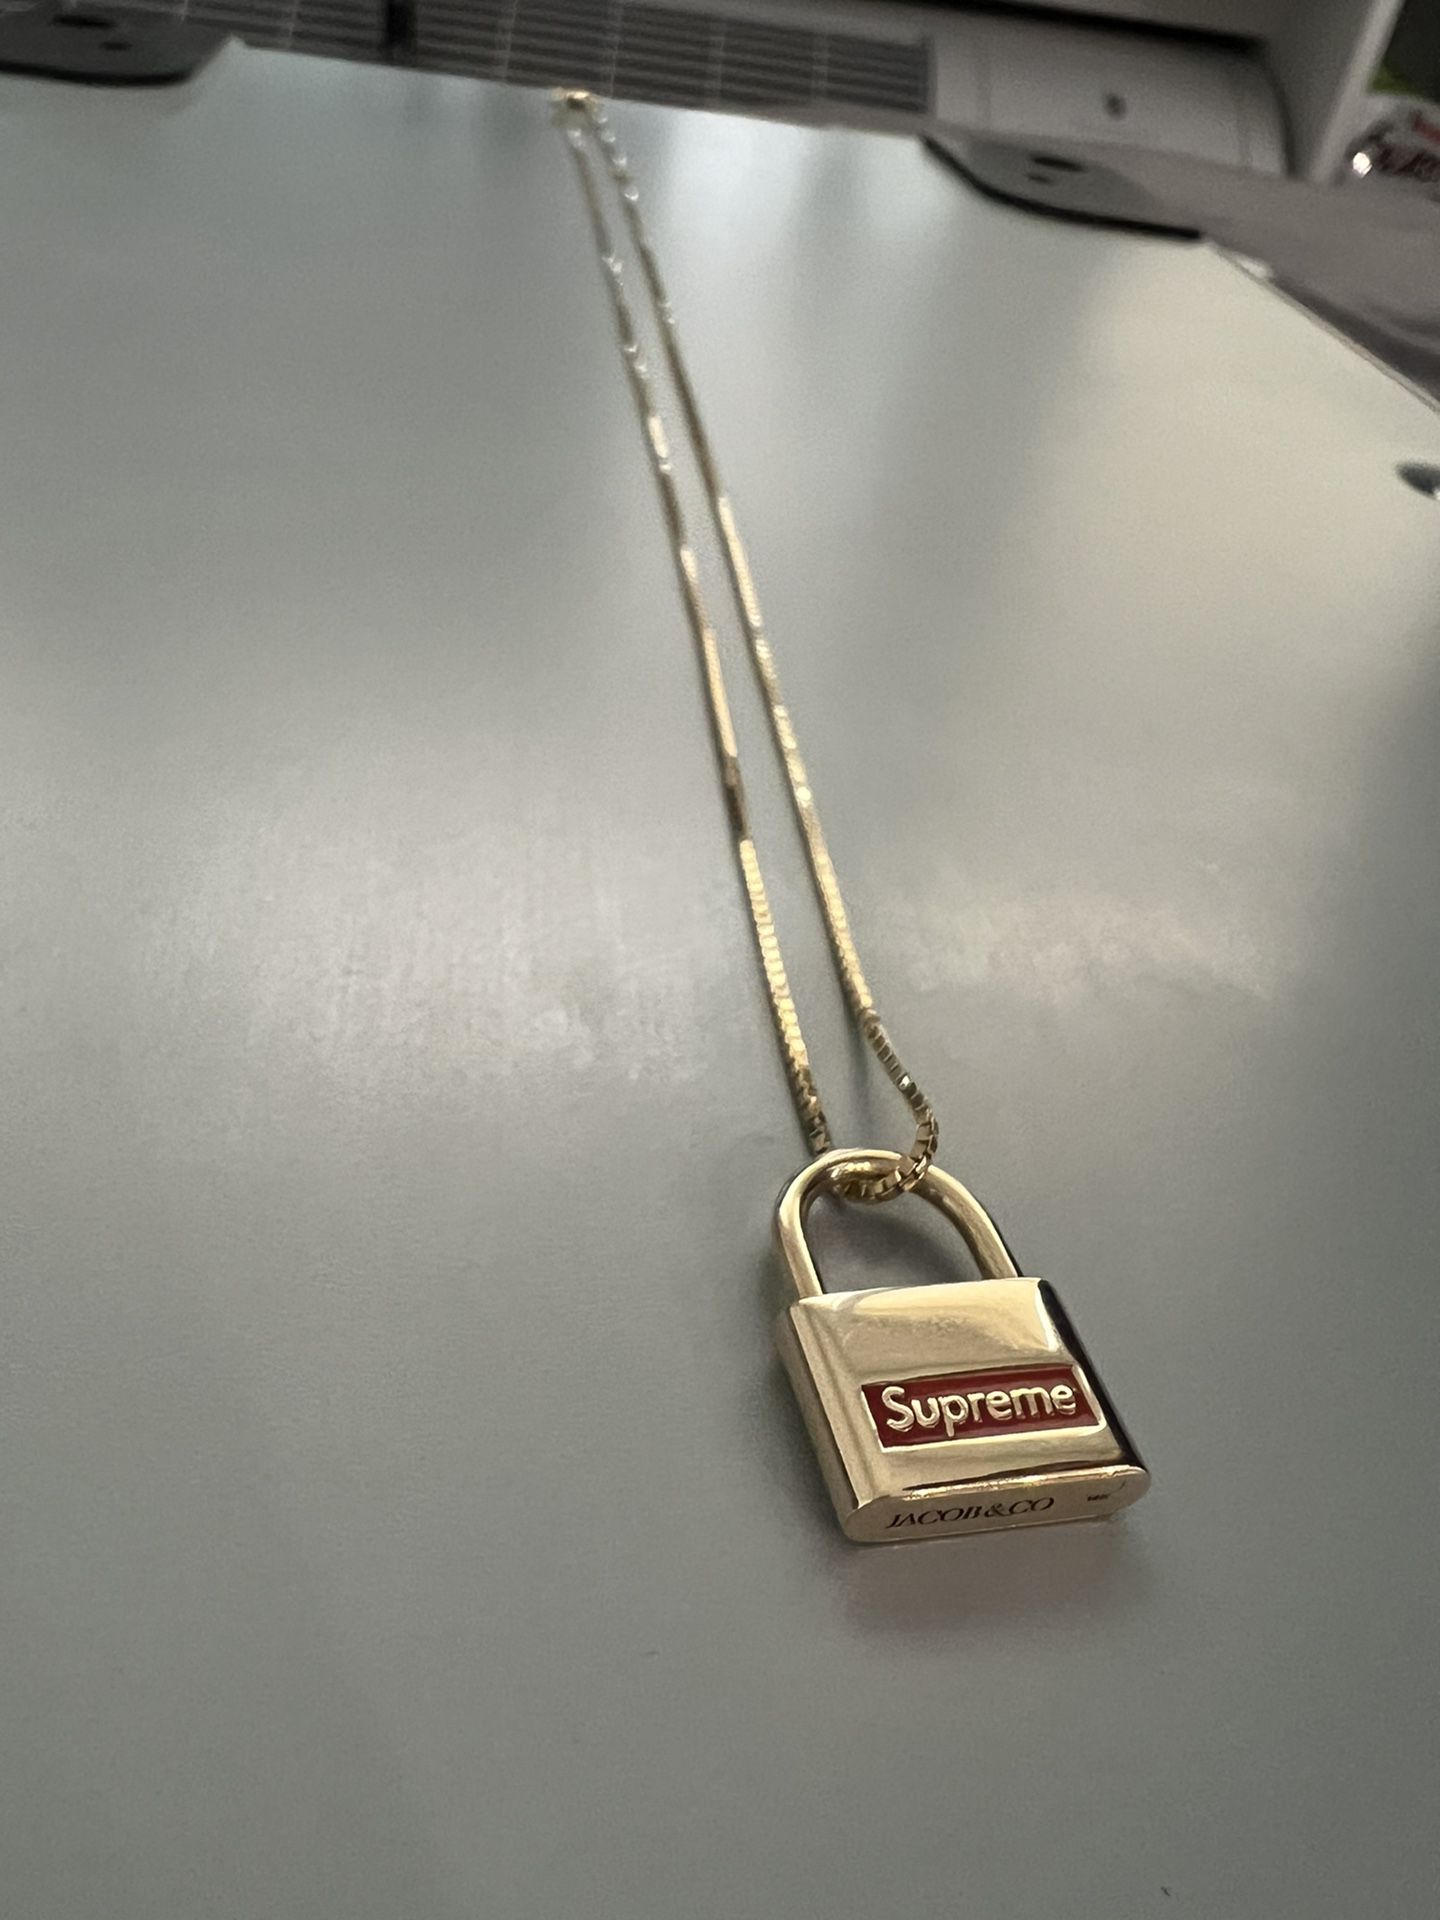 Supreme Jacob & Co. 14k Gold Lock Pendant for Sale in Portland, OR - OfferUp